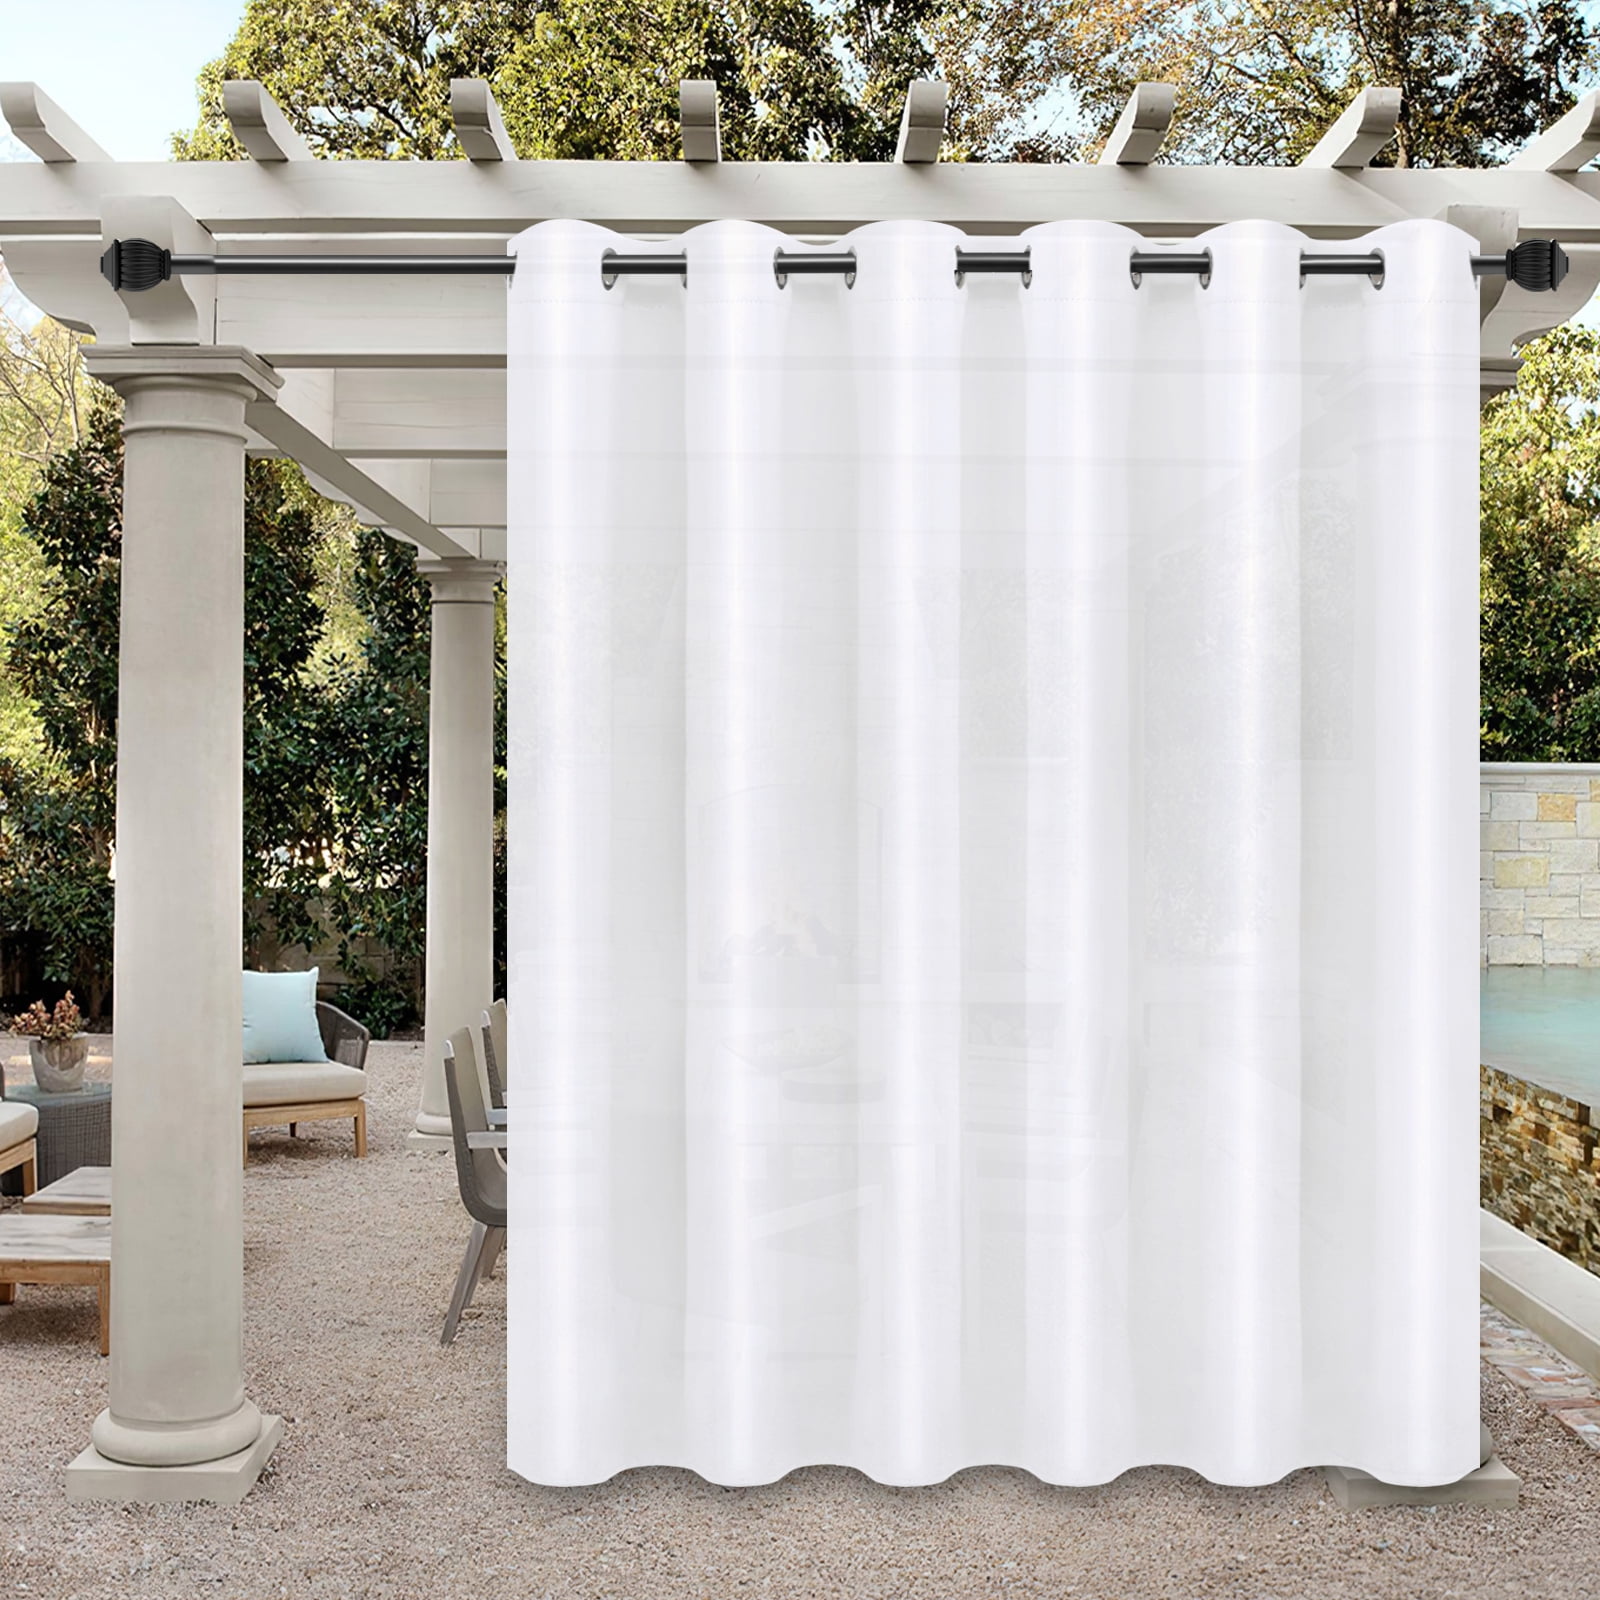 4 x 7, Beige Gazebos With Rustproof Grommets Outdoor Vinyl Curtain for Patio Furniture 12 Oz For Pergola 100% UV & Weather Resistant Patio Blackout Drapes for Dining Room Window Porch